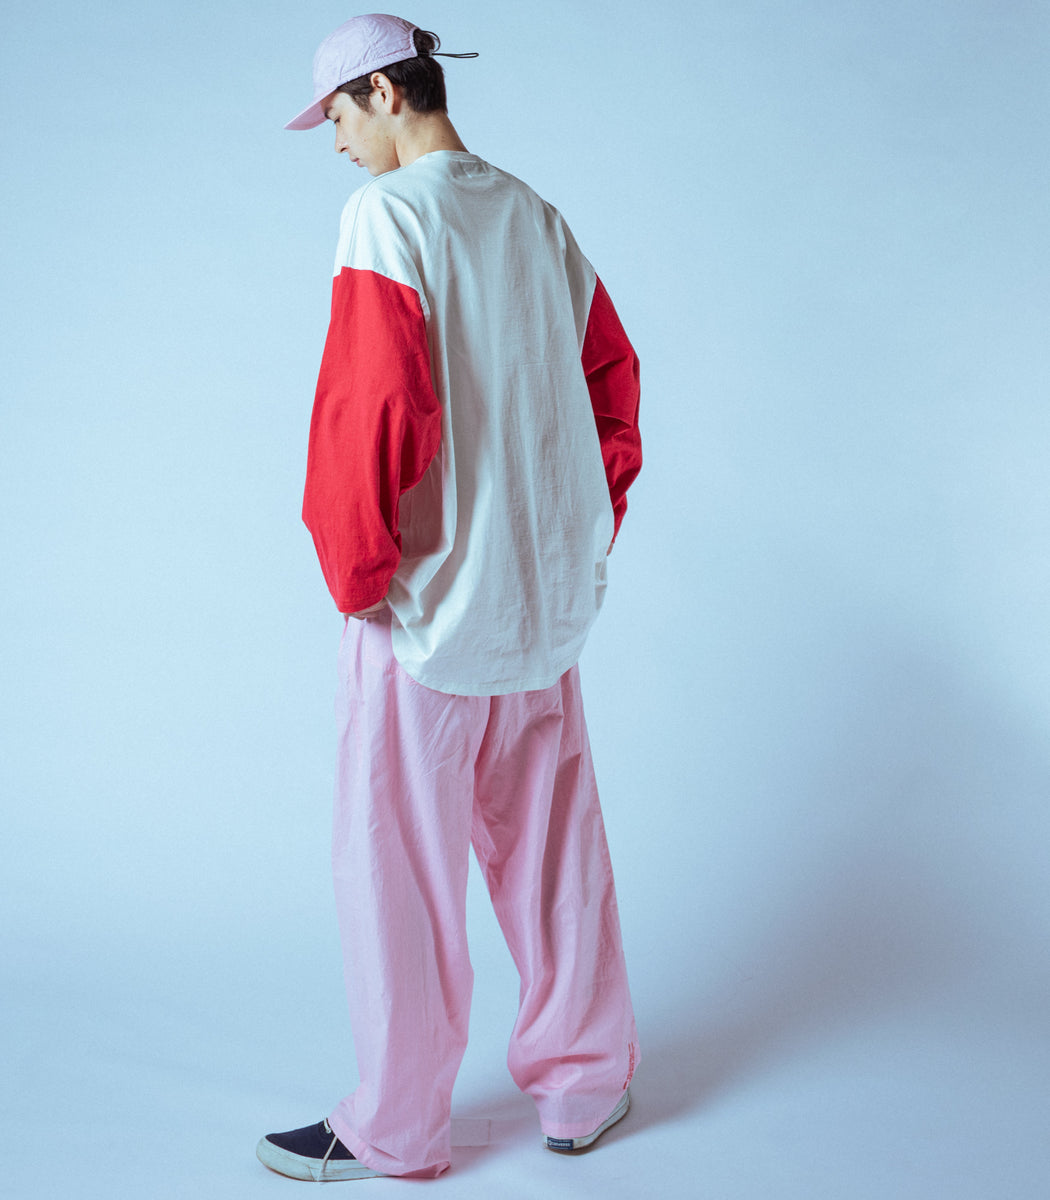 Load image into Gallery viewer, Baseball T-Shirt OFF WHITE×RED
